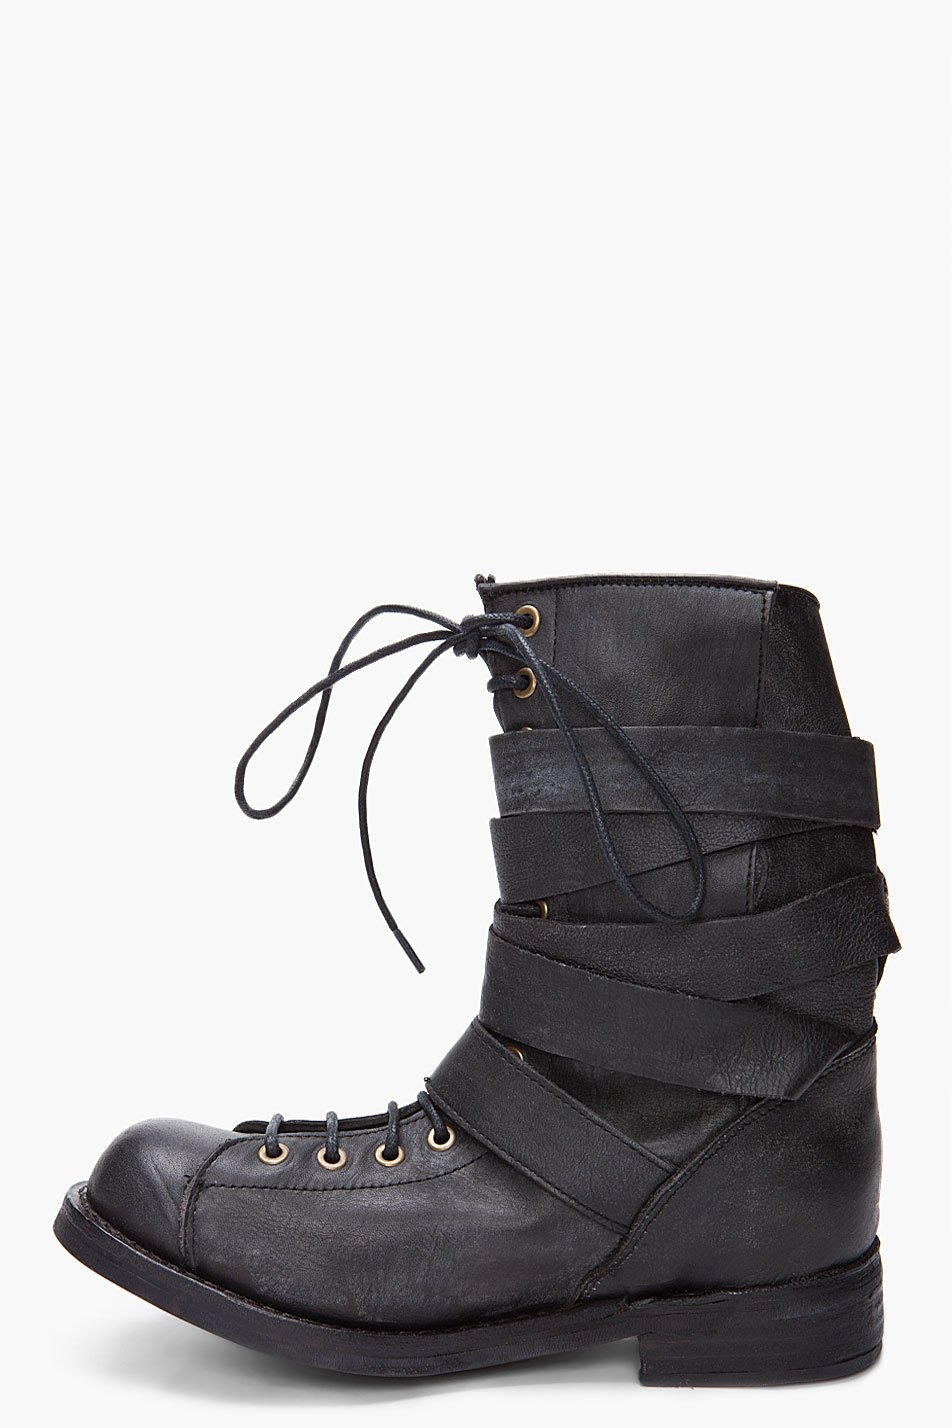 Lyst - Jeffrey Campbell Black Fall Man Boots in Black for Men